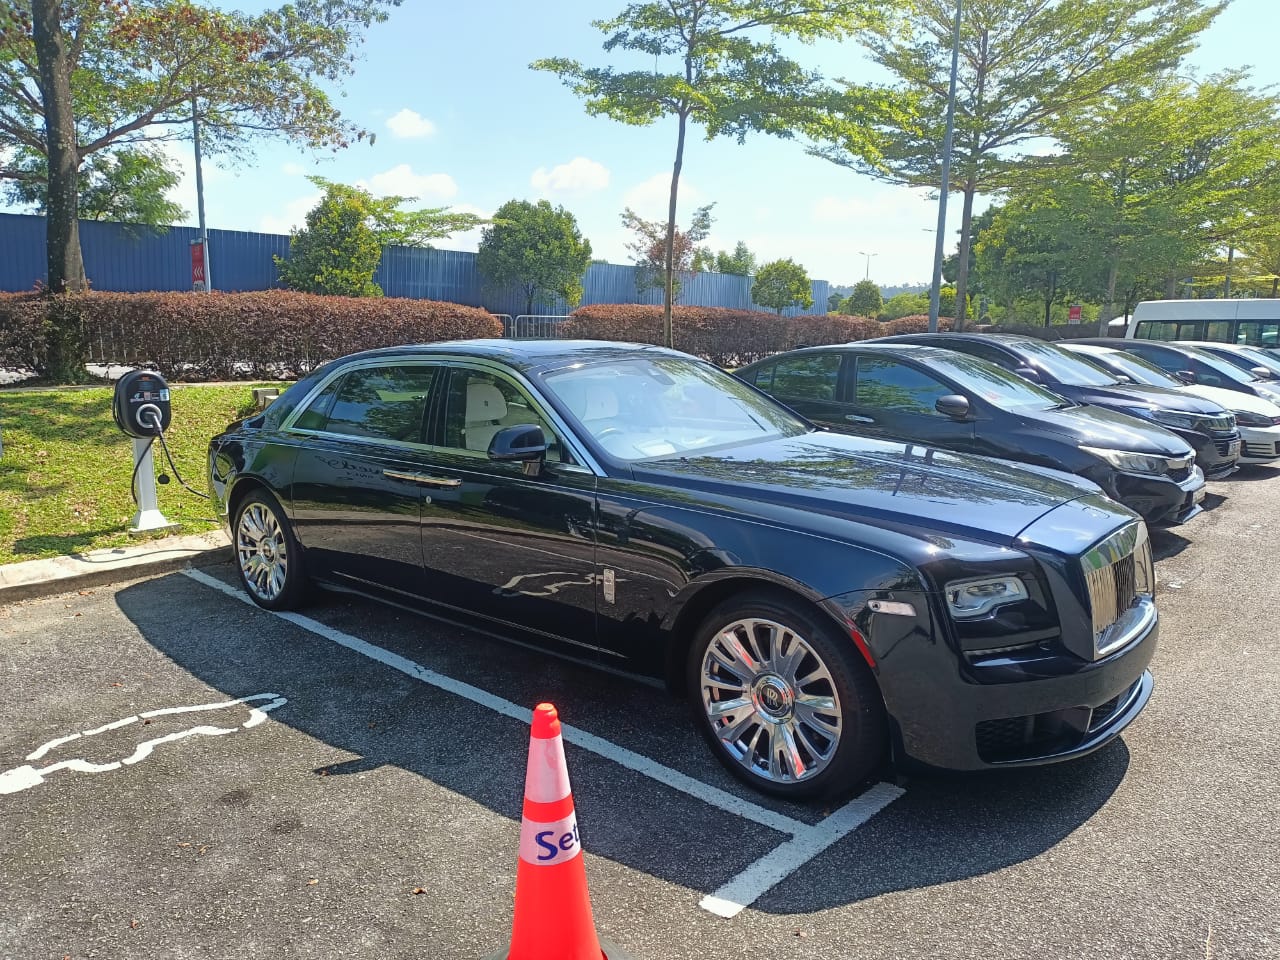 Used RollsRoyce Coupes for Sale Near Me  Carscom